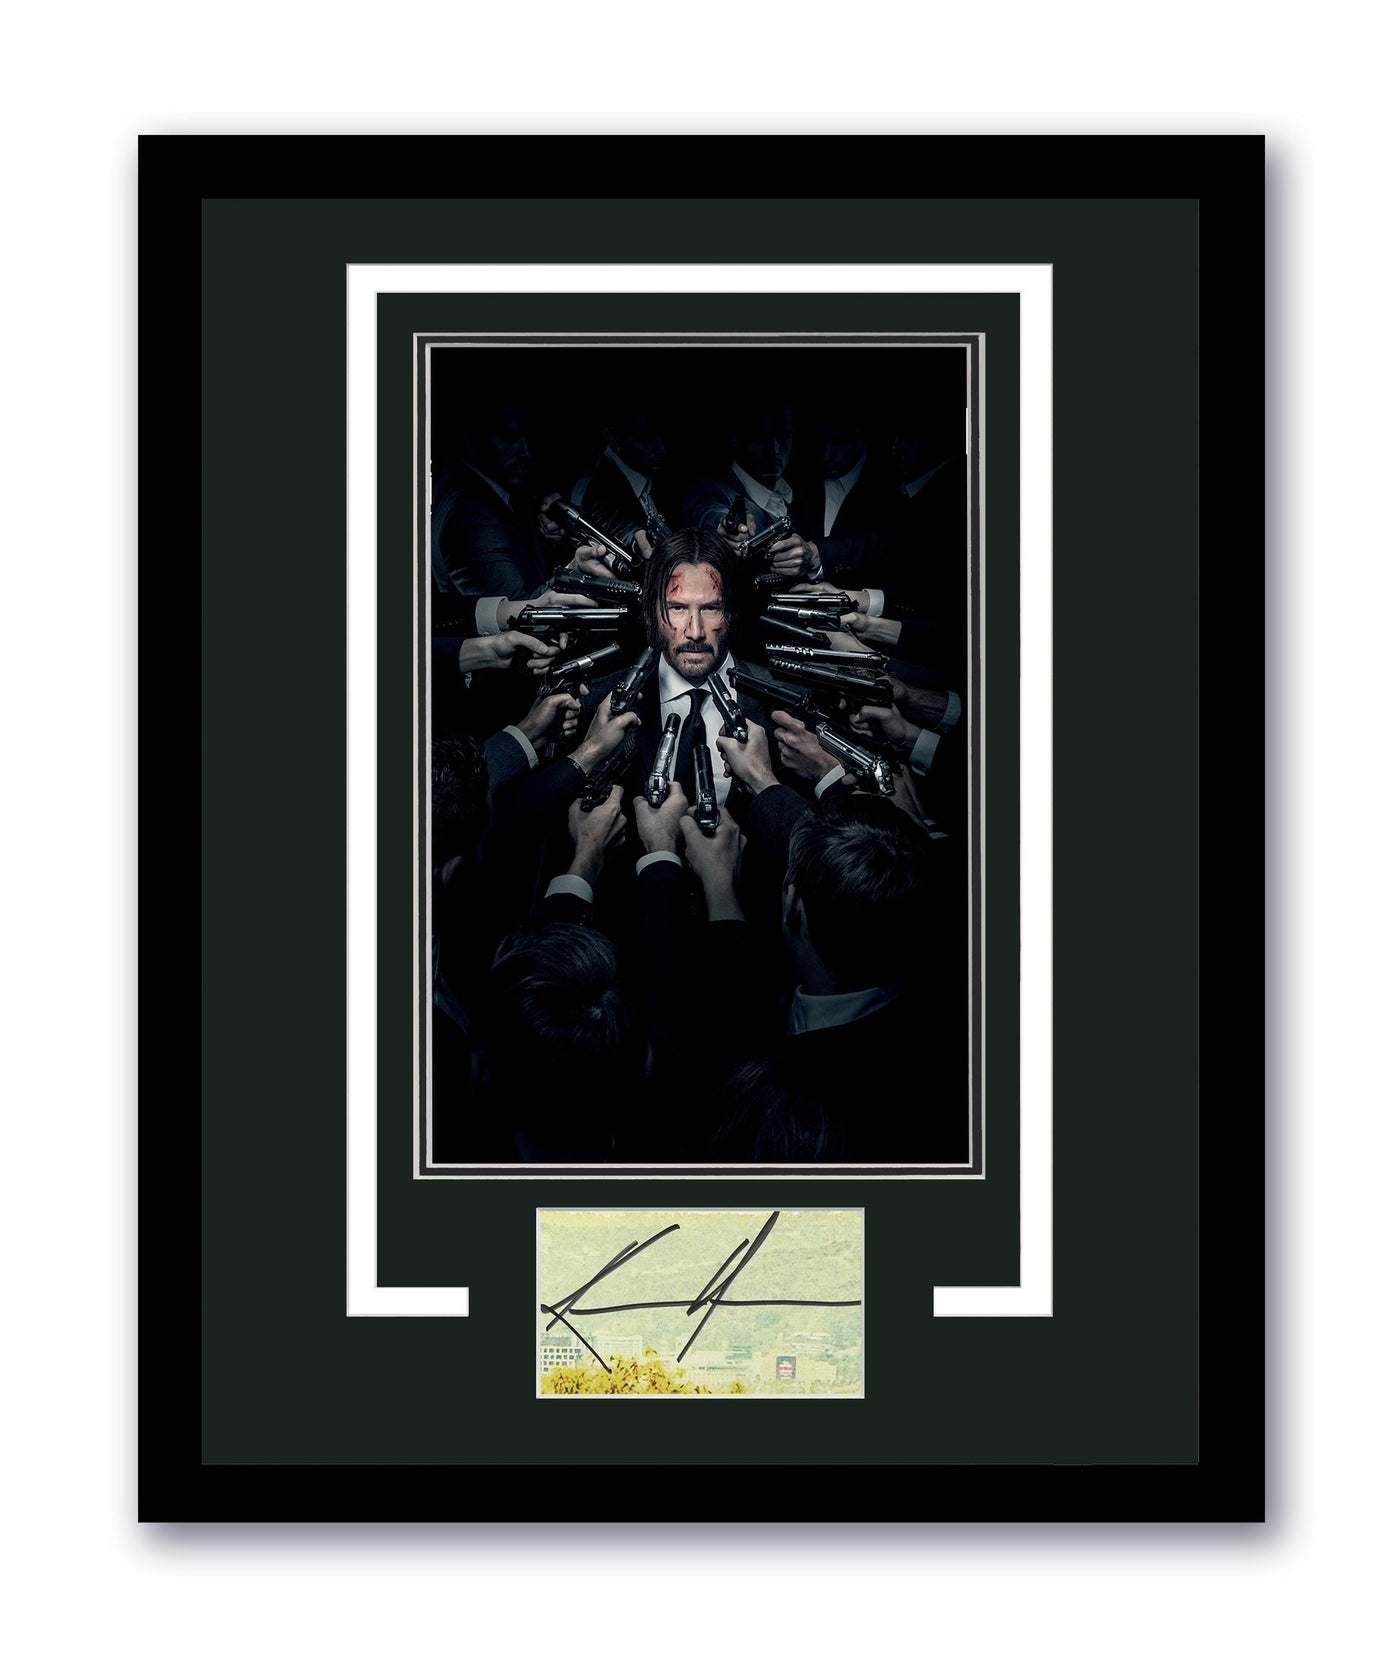 Keanu Reeves Signed Cut 11x14 Frame John Wick Autographed Authentic ACOA